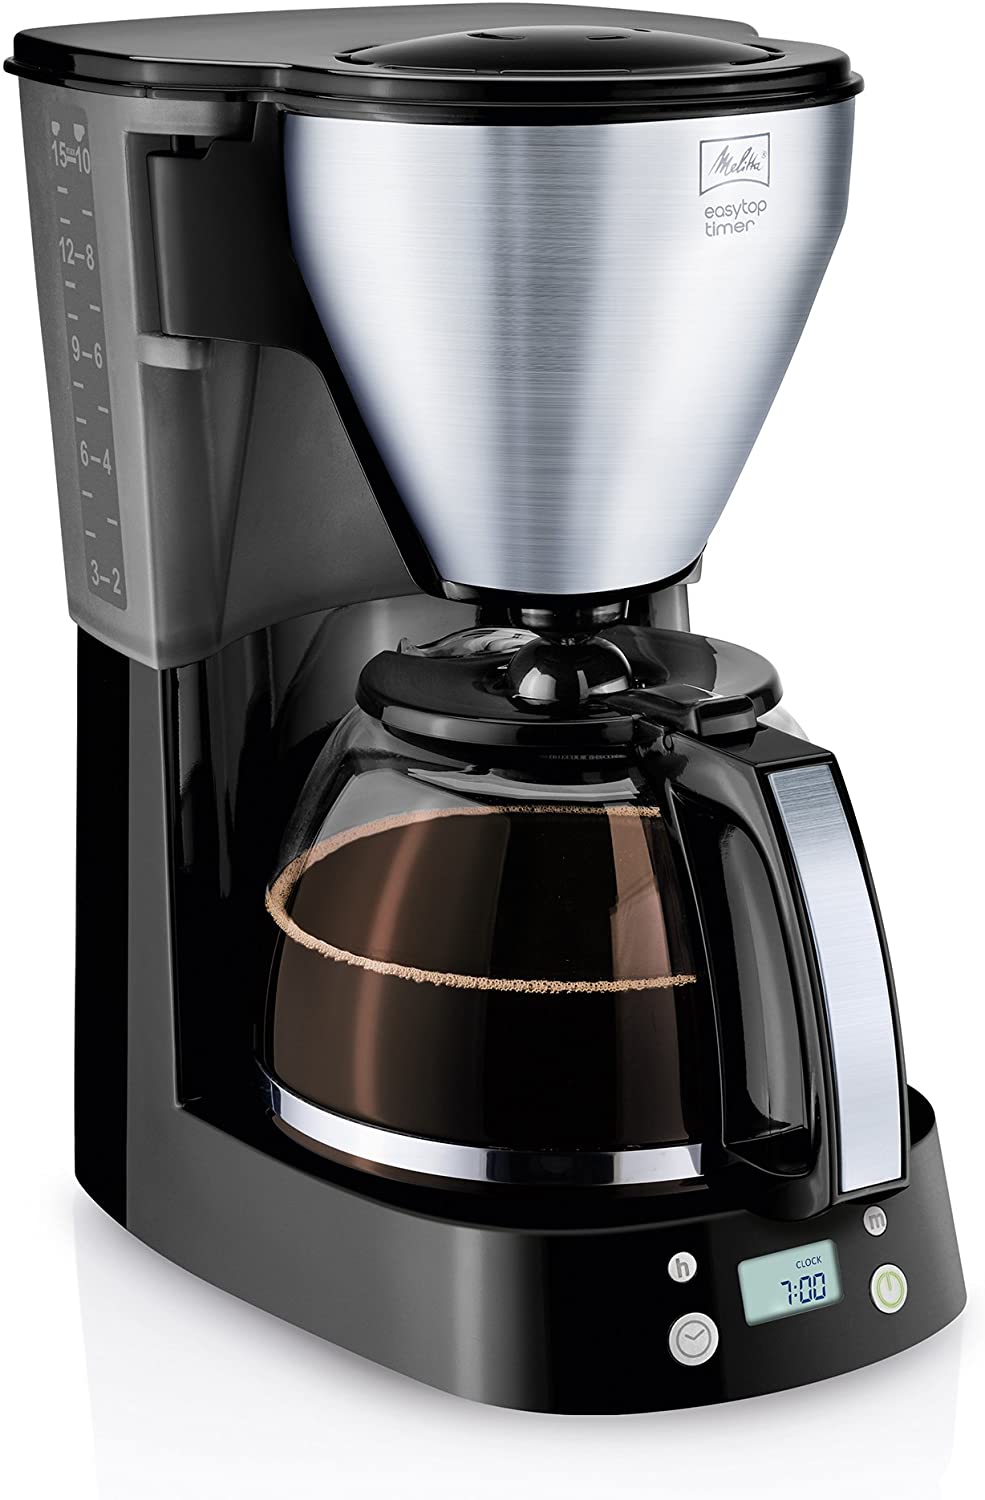 Melitta Easy Top Timer 1010-15, Filter Coffee Machine with Glass Jug, Programmable Warming Time, Black Stainless Steel